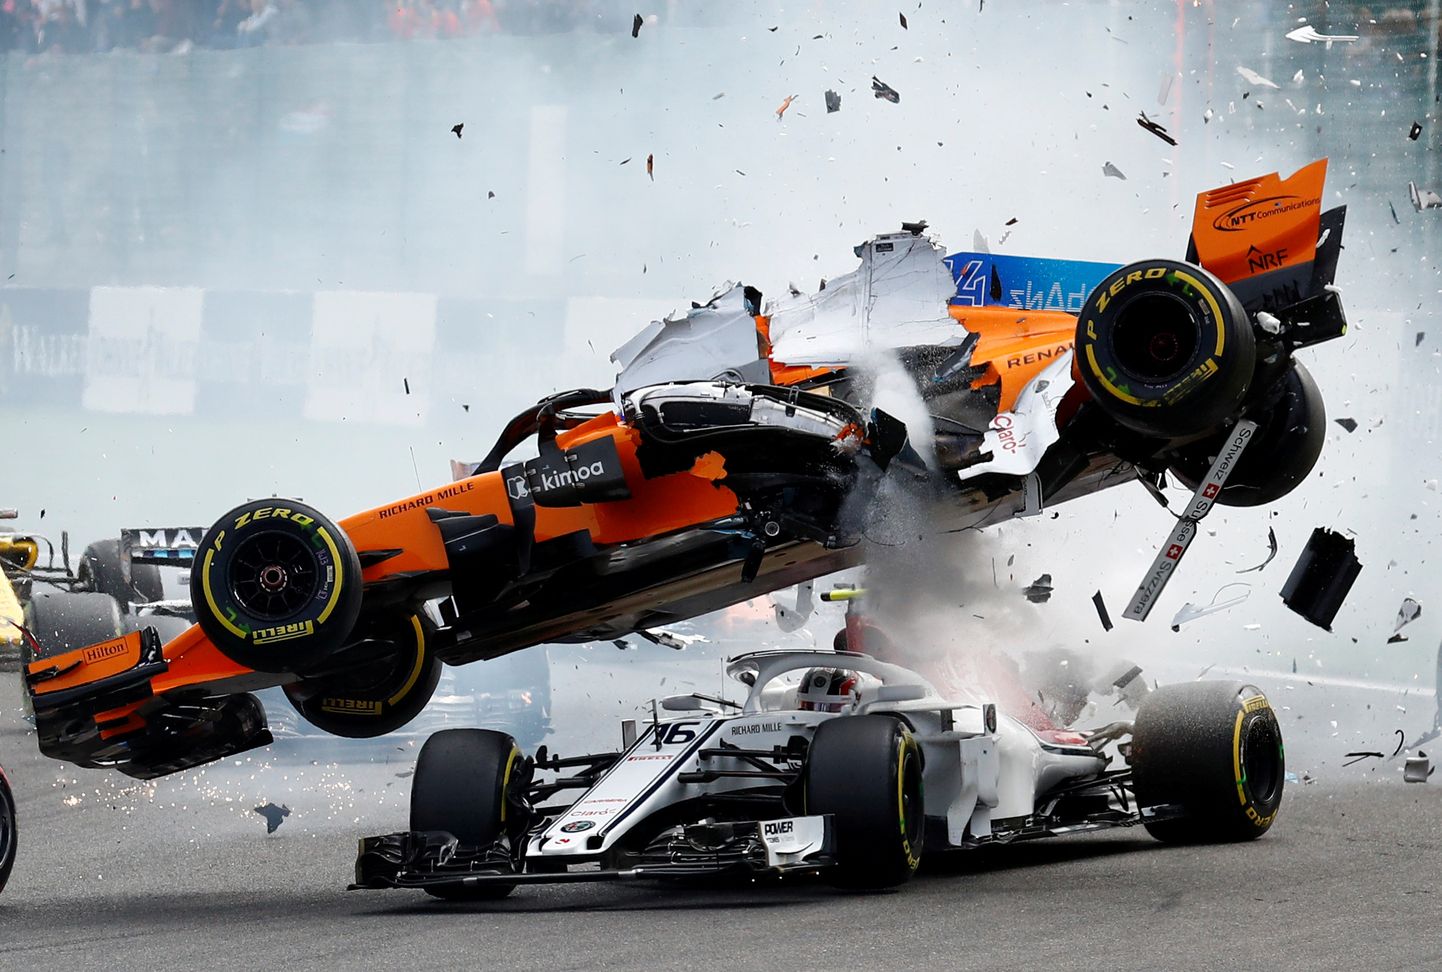 Formula One F1 - Belgian Grand Prix - Spa-Francorchamps, Stavelot, Belgium - August 26, 2018. McLaren's Fernando Alonso and Sauber's Charles Leclerc crash at the first corner.  REUTERS/Francois Lenoir TPX IMAGES OF THE DAY